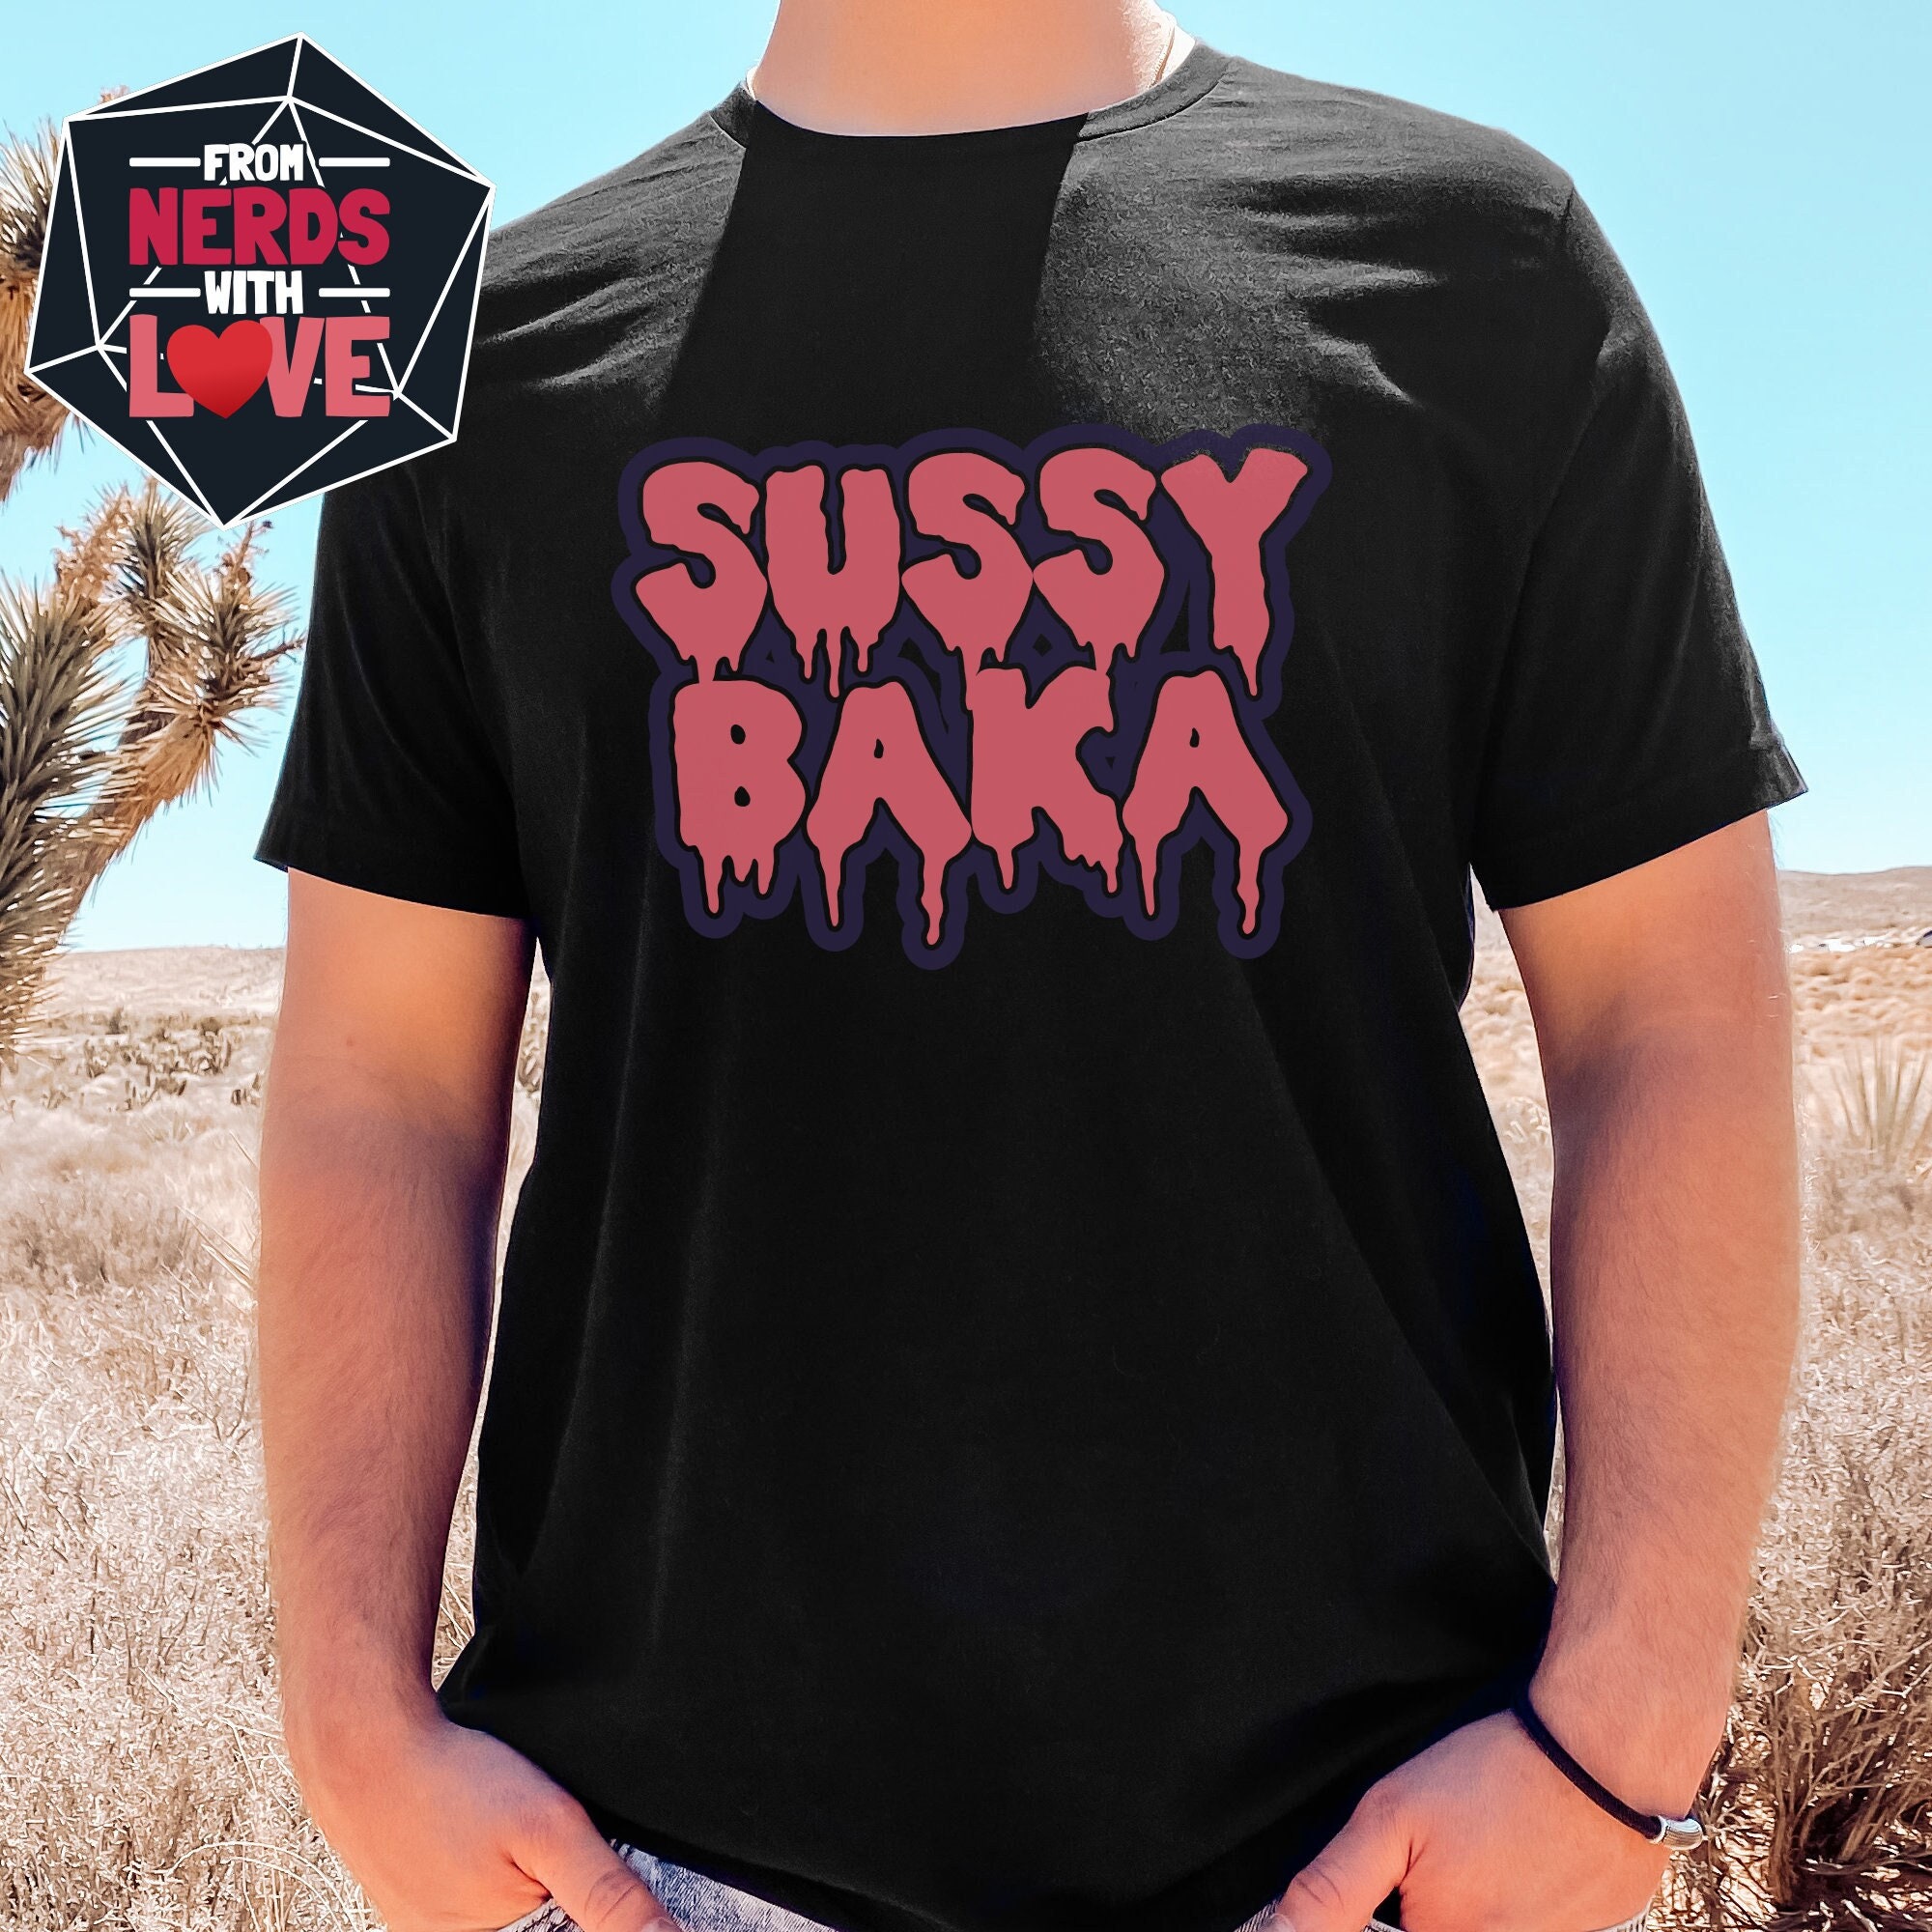 Sussy Baka - What does sussy baka mean?